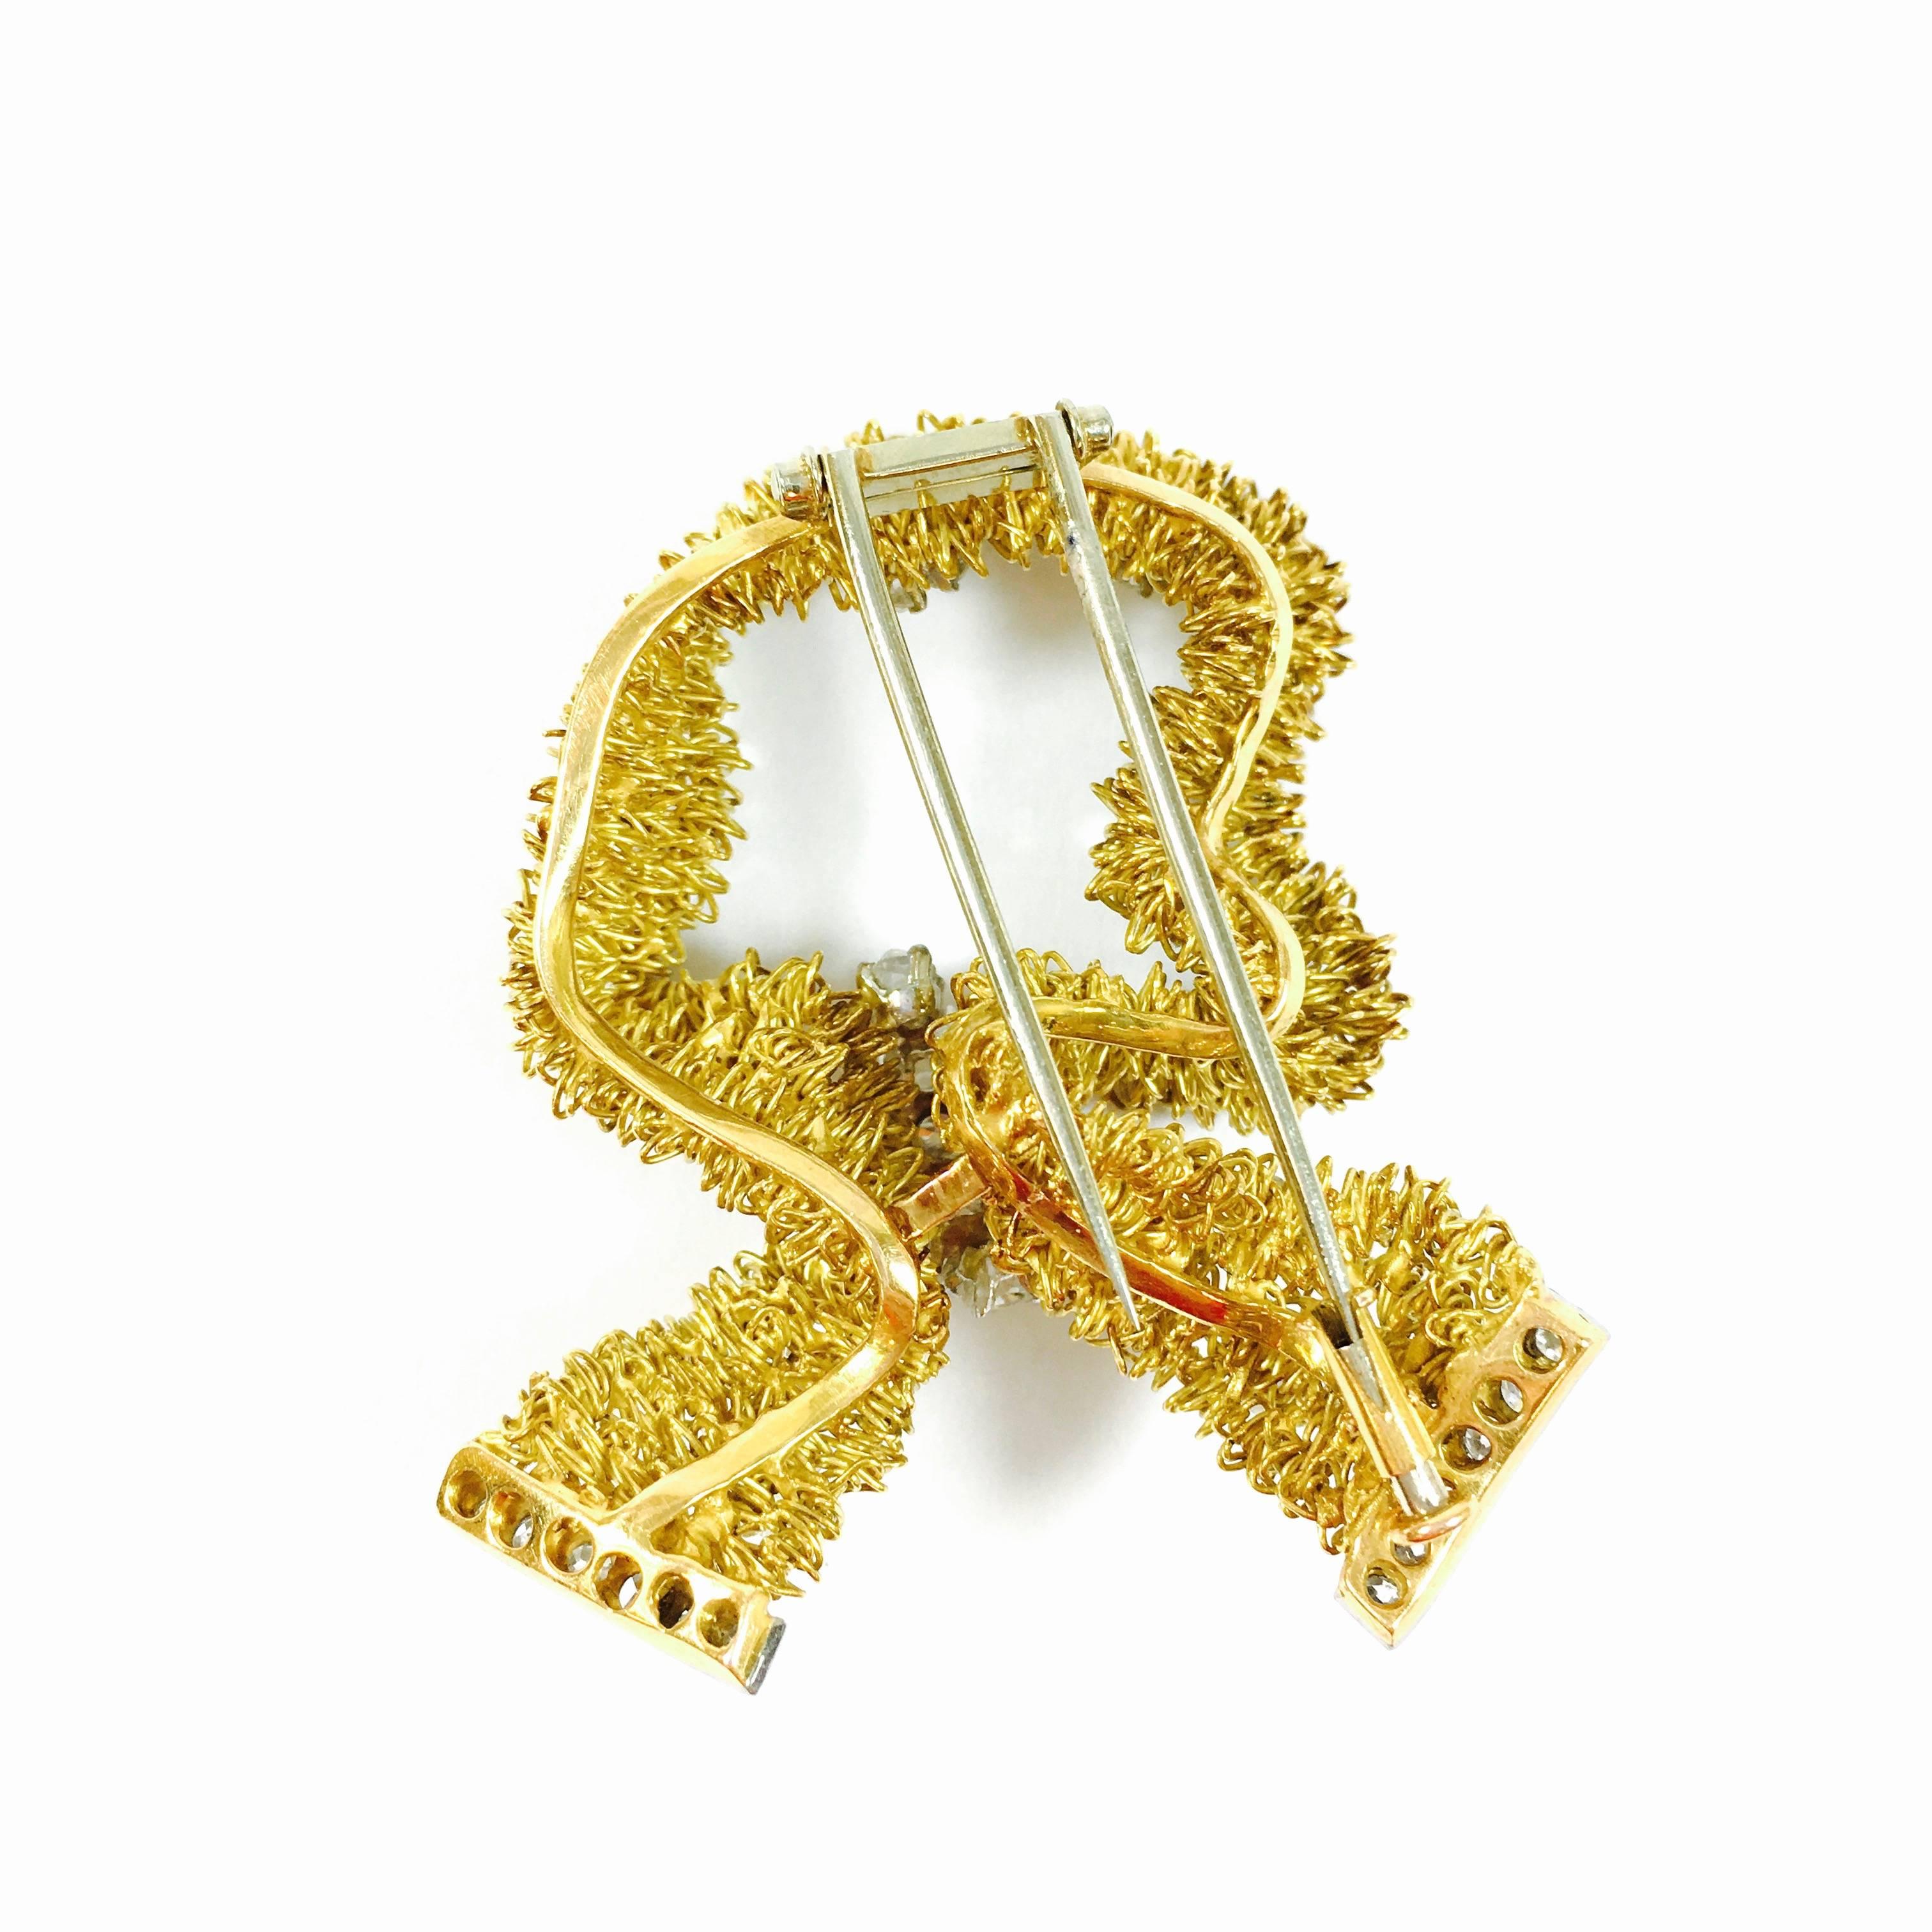 18K yellow gold and platinum ribbon, set with old mine, old european and single cut round and cushion diamonds.
Approximate total diamond weight: 3.00ct  Color: G-H, Clarity: VS1-VS2
Measurements: 
Length: 2 inches
Width: 1.75 inches
Weight: